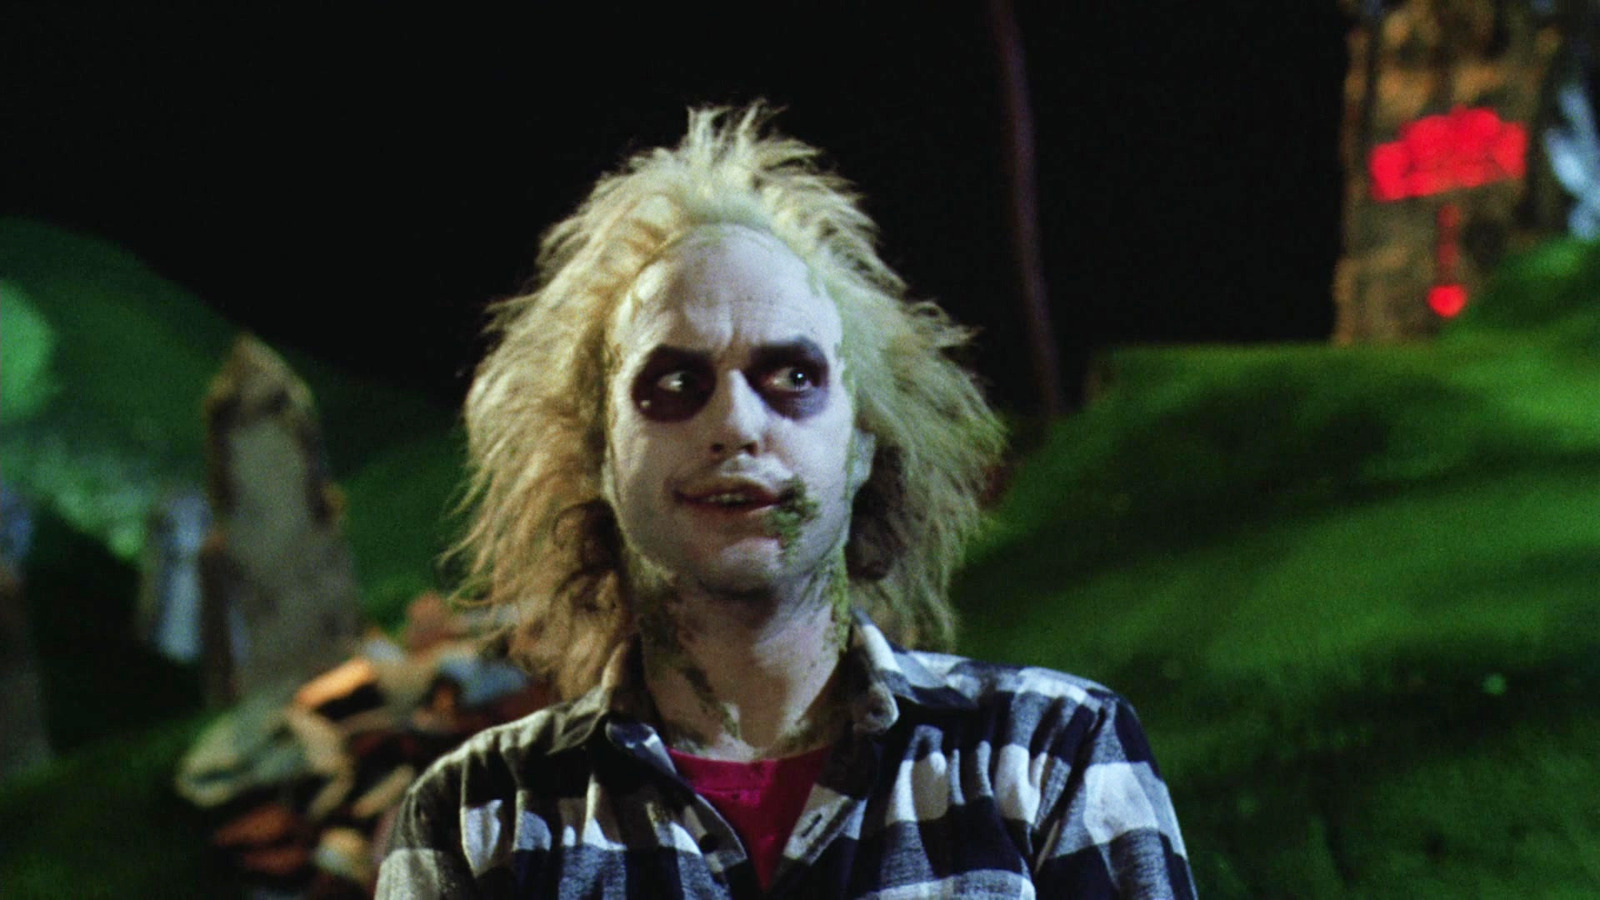 Beetlejuice 2 – Release Date, Cast, Director, And More Info